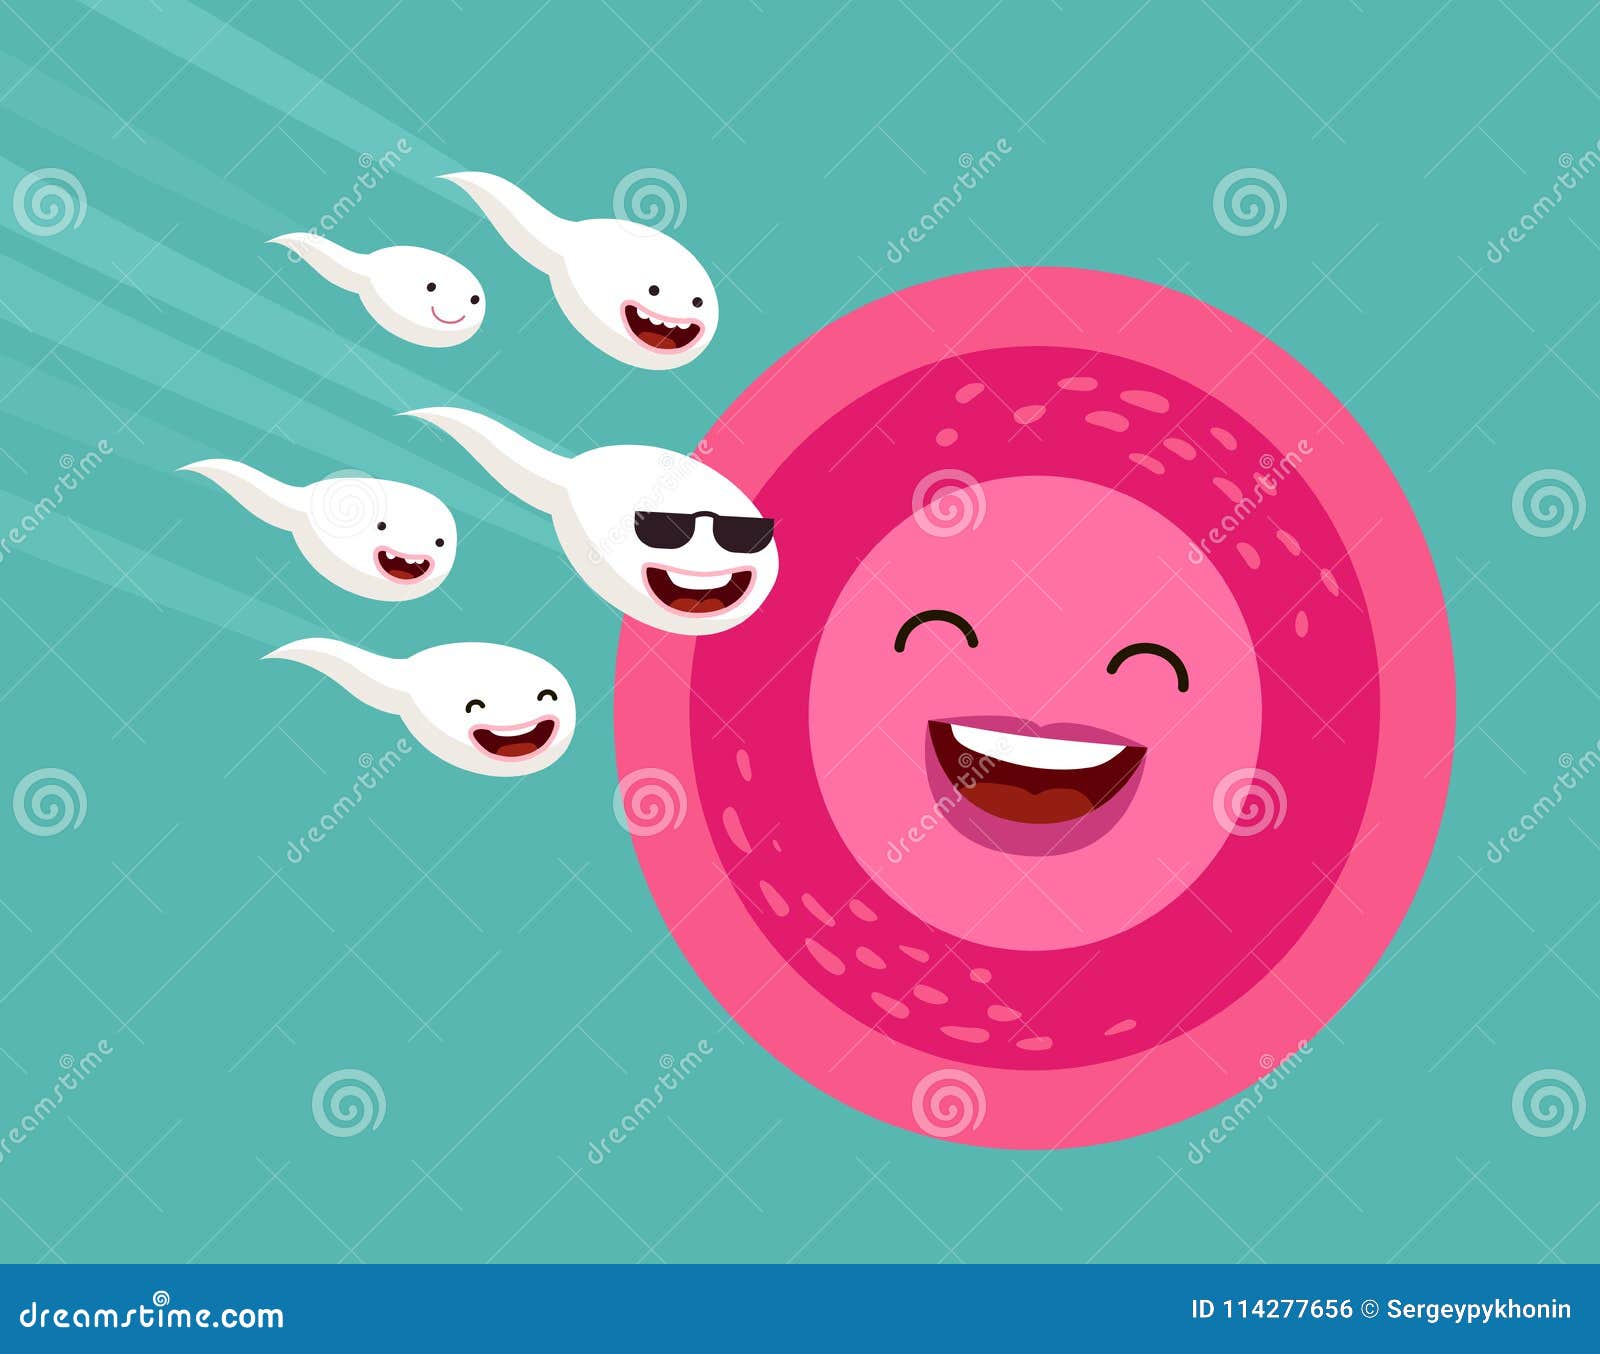 Oocyte Cartoons Illustrations And Vector Stock Images 721 Pictures To